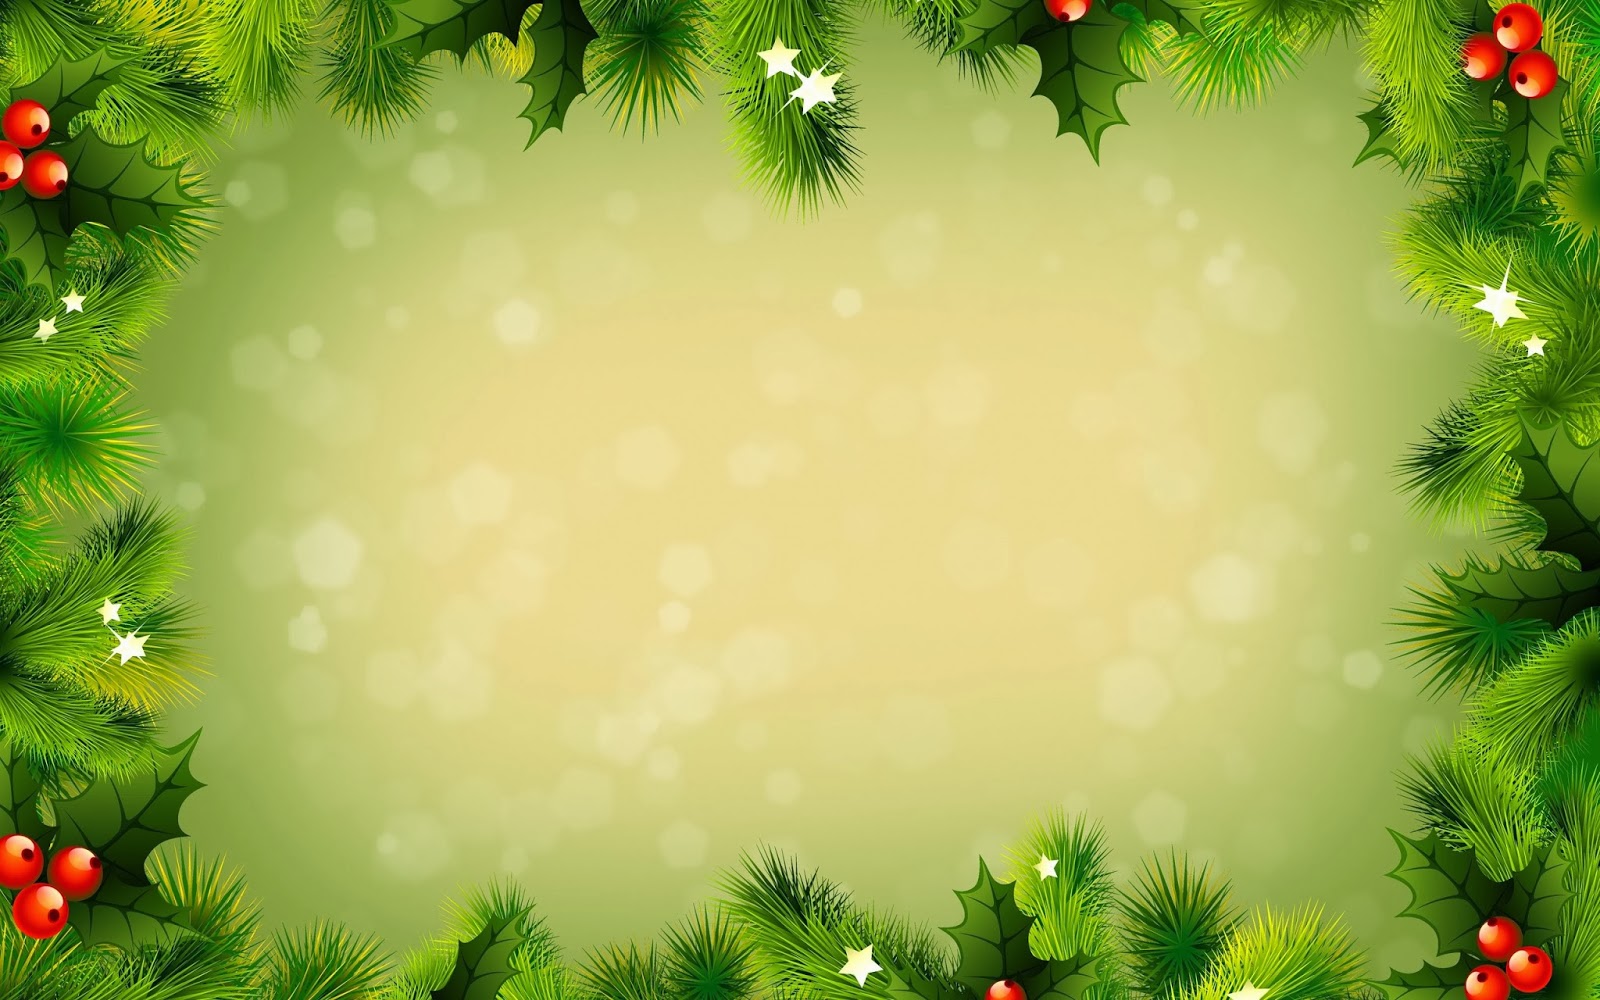 Christmas Greeting card Message Background PSD Template Free download